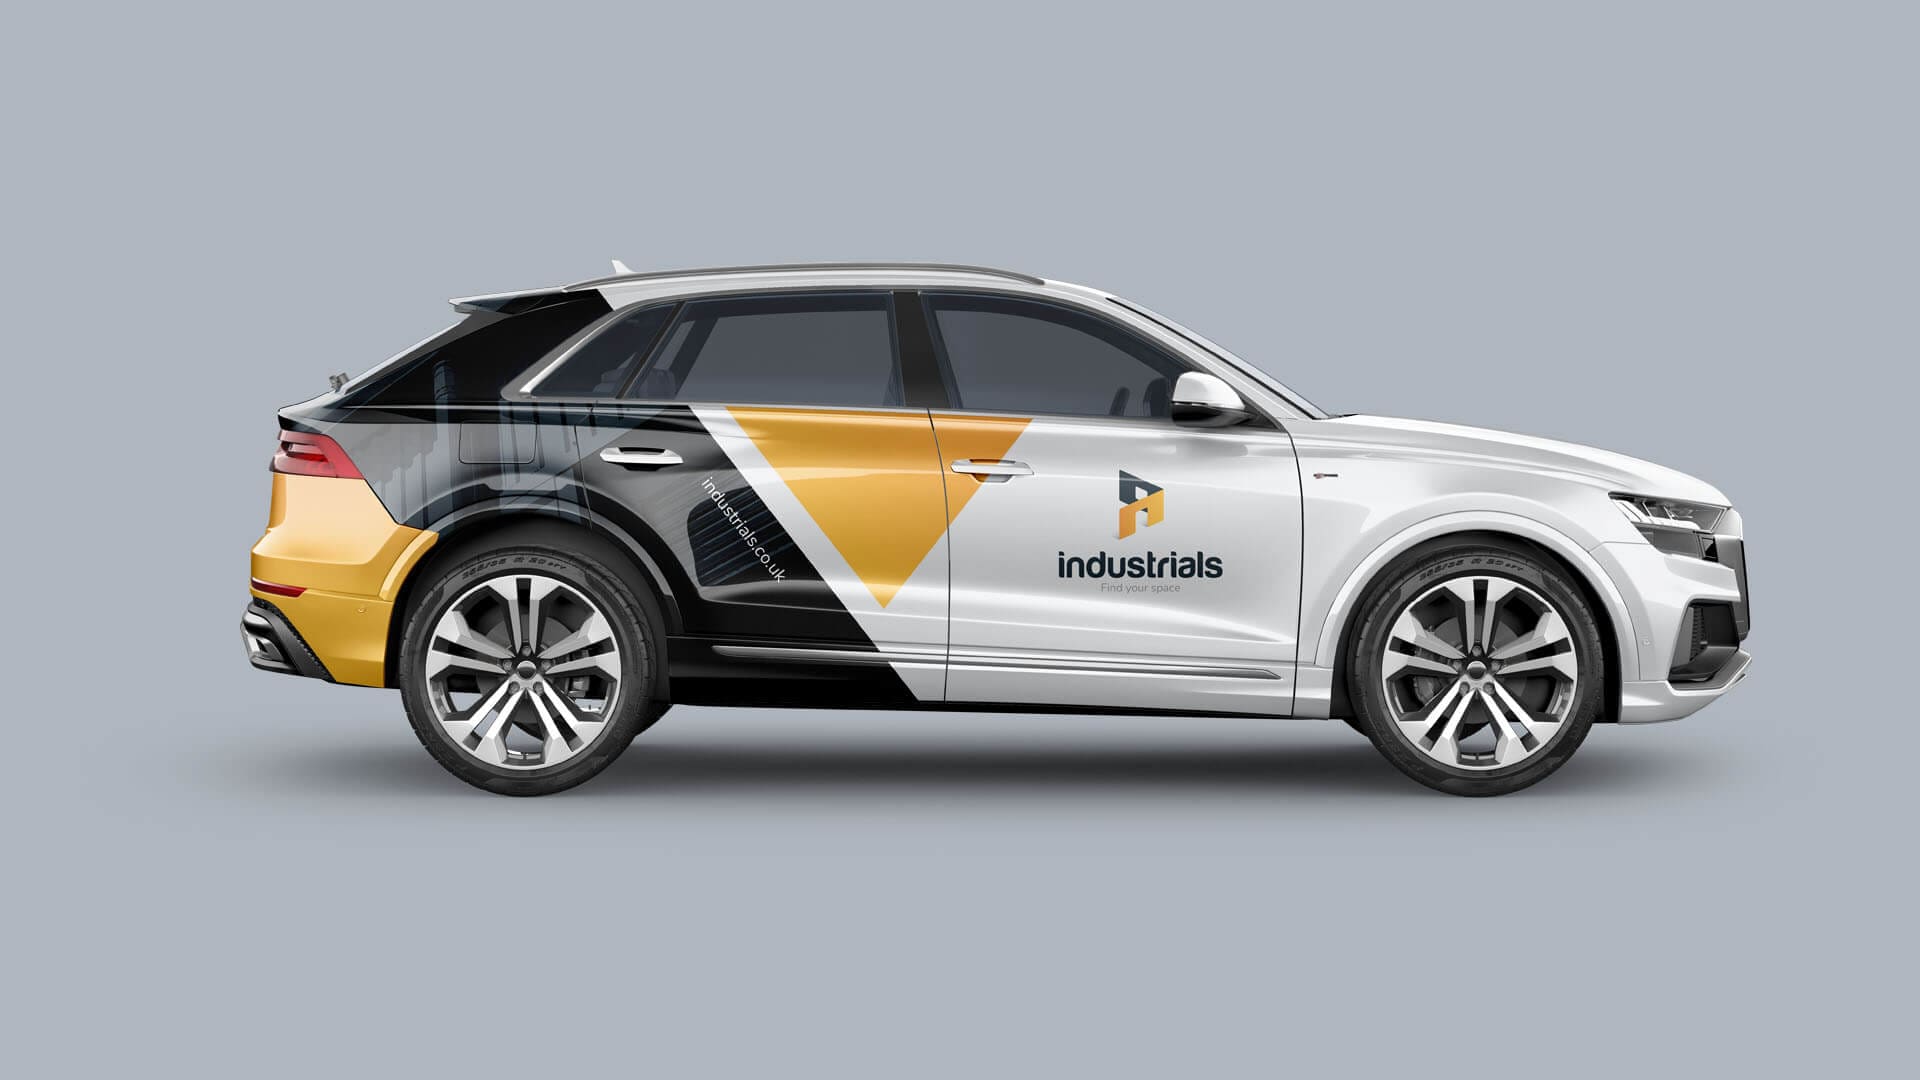 Vehicle Graphics on Audi estate for Multi-let Industrial REIT - Industrials.co.uk